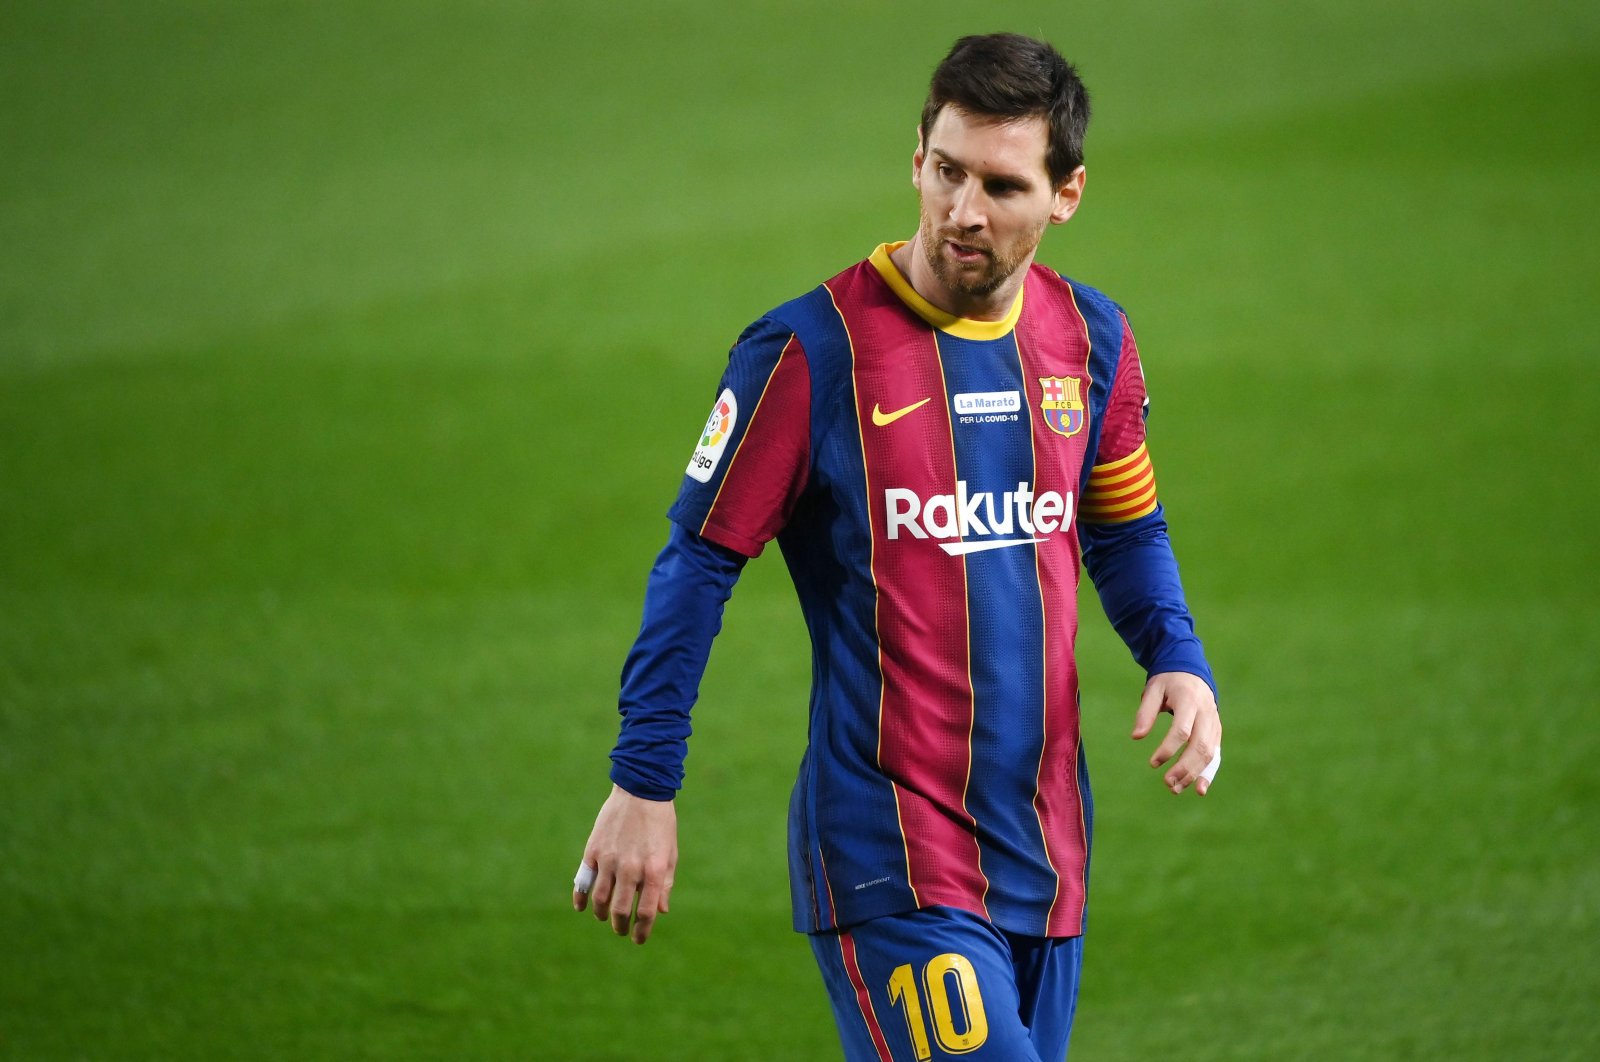 Barcelona's Lionel Messi walks on the pitch during a La Liga match against Valencia at the Camp Nou stadium in Barcelona, Spain, Dec. 19, 2020. (AFP Photo)